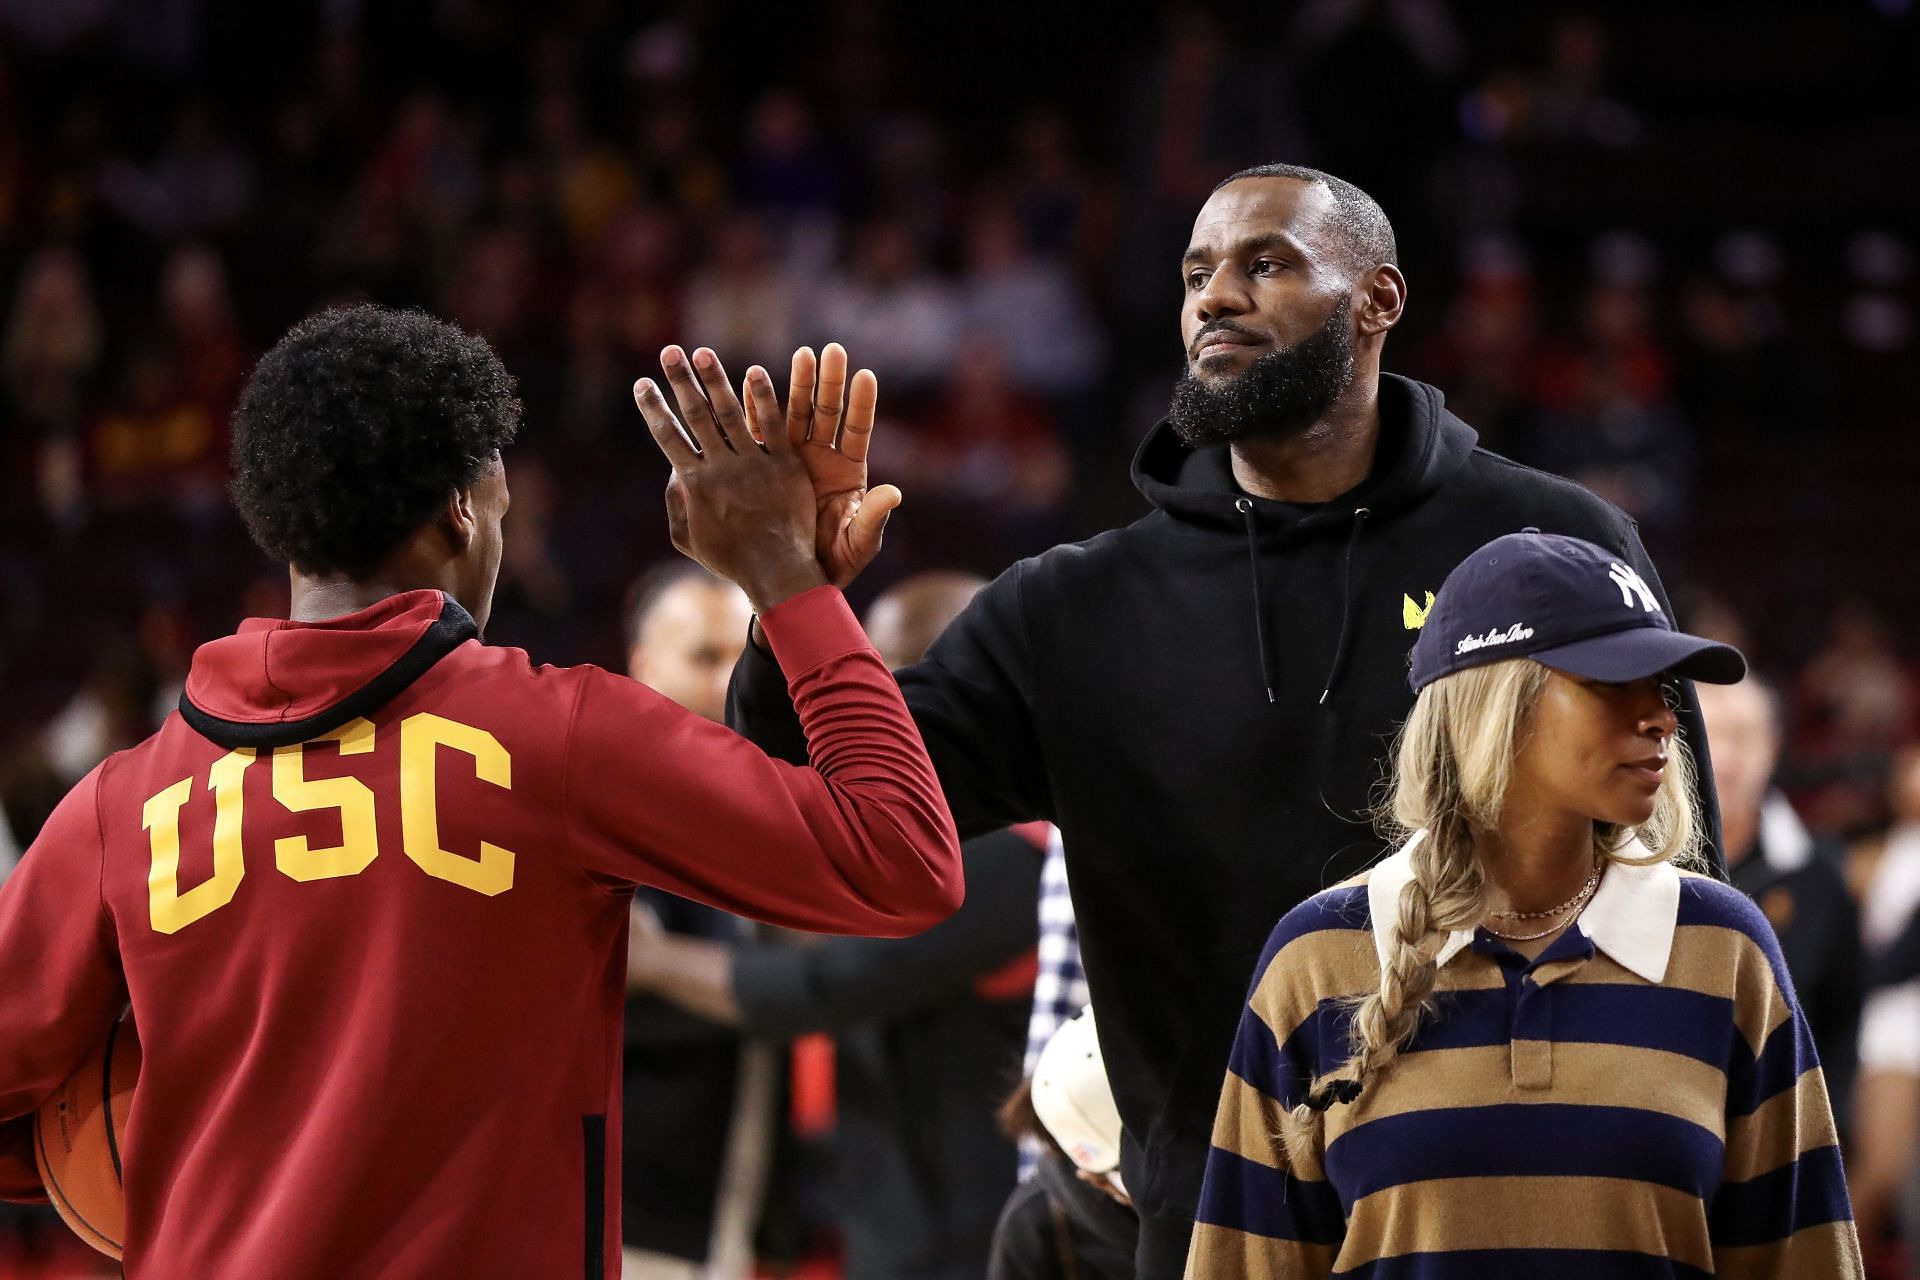 Bronny James of the USC Trojans greets his dad, LeBron James of the LA Lakers, before a game against the Stanford Cardinal.